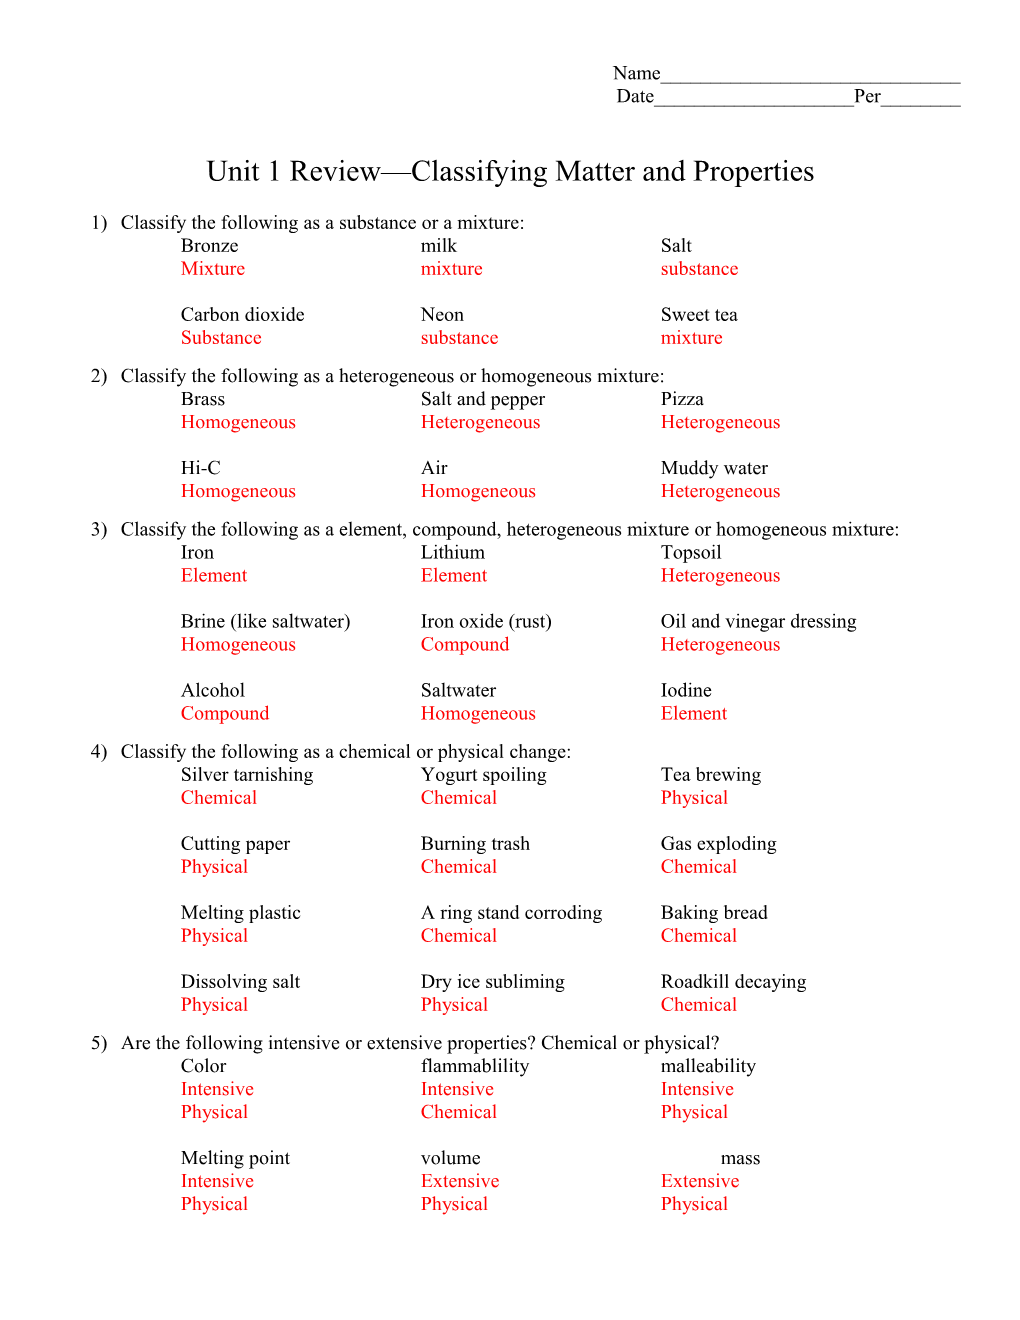 Unit 1 Review Classifying Matter and Properties